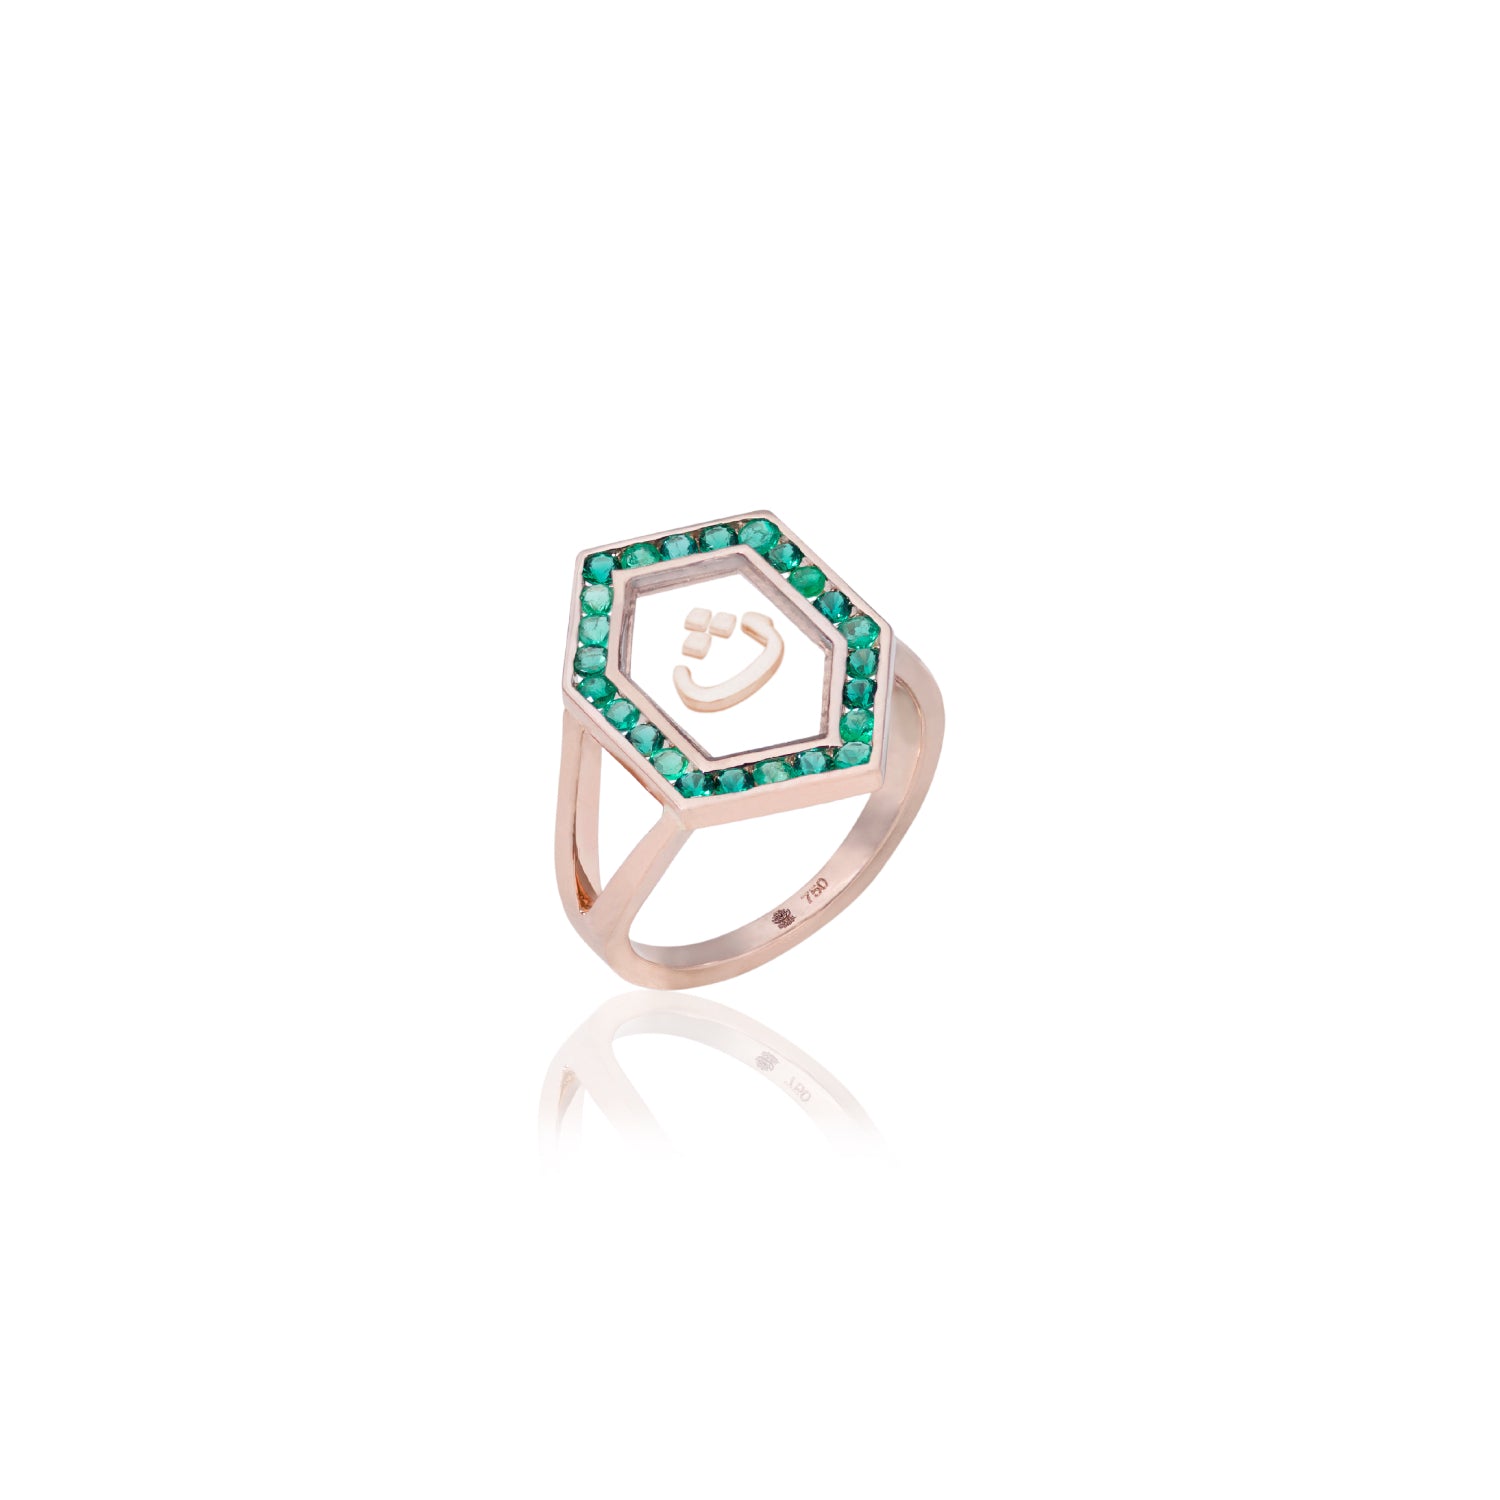 Qamoos 1.0 Letter ث Emerald Ring in Rose Gold